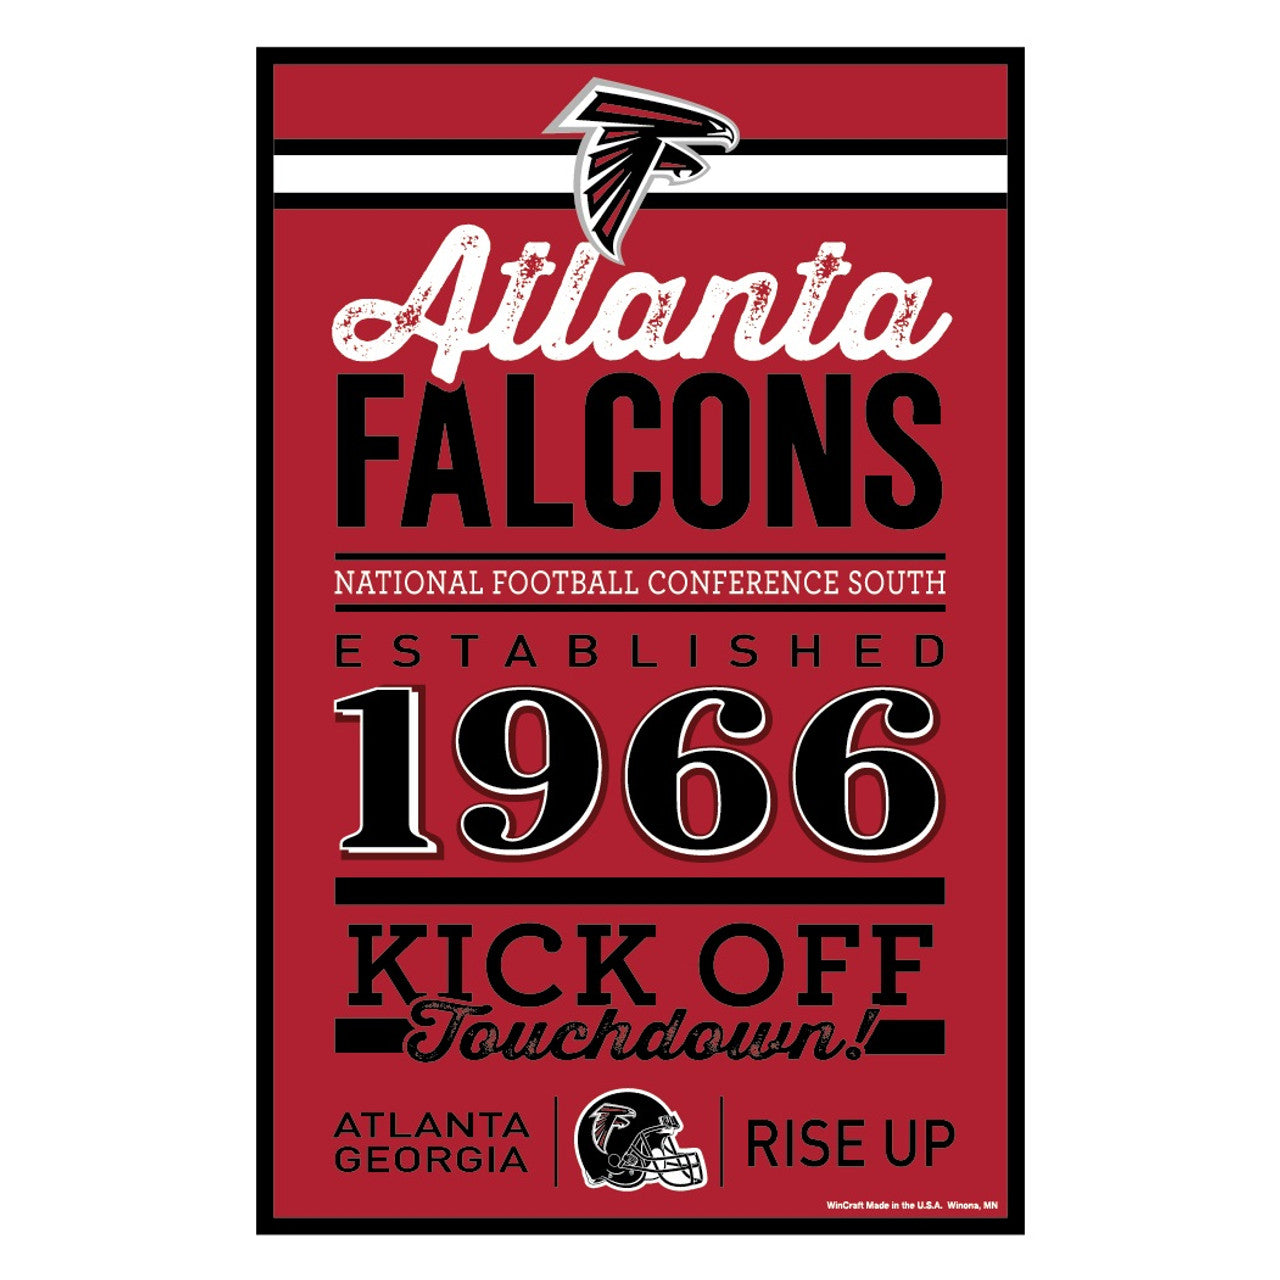 Atlanta Falcons Established Wood Sign - 11" x 17" with team colors and established date. Made of wood, officially licensed.